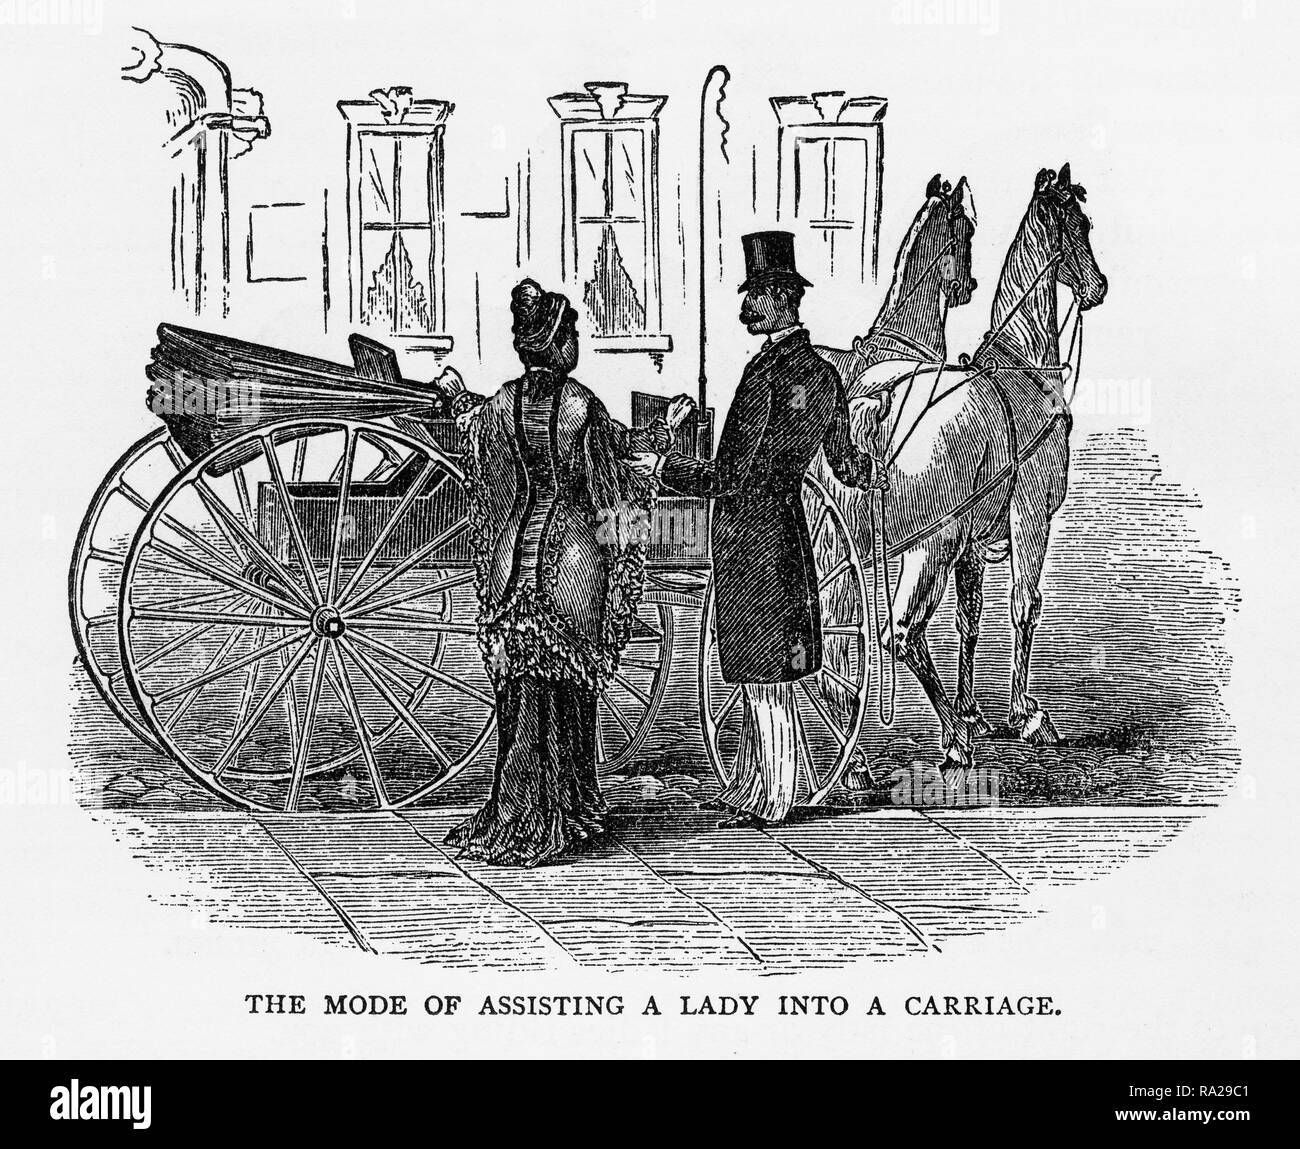 Proper Mode of Assisting a Lady into a Carriage Victorian Engraving, 1879 Stock Photo